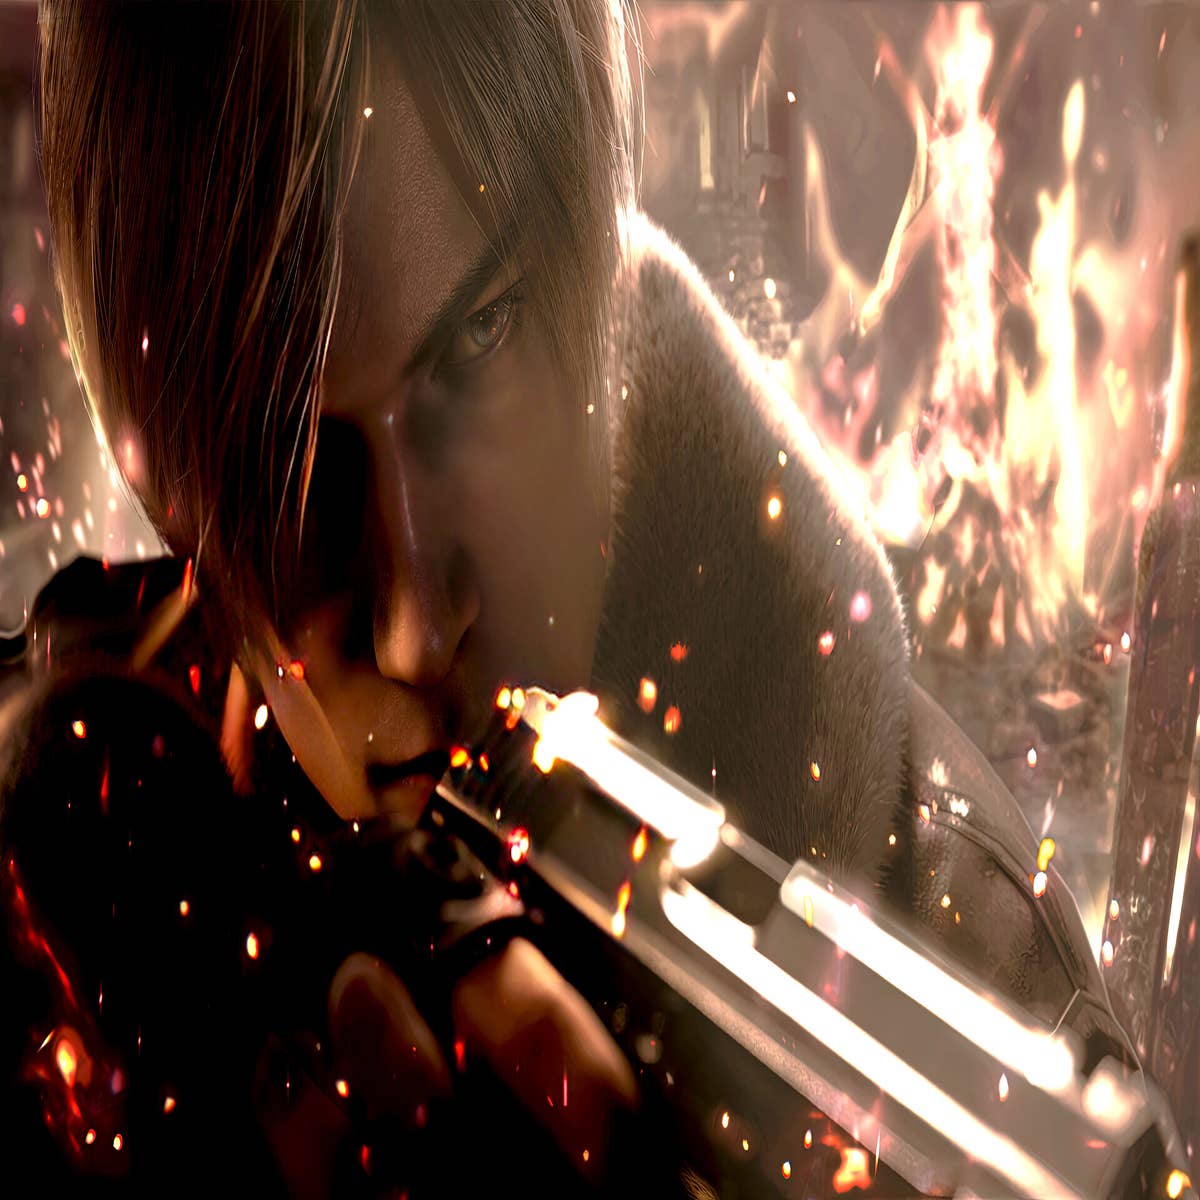 Resident Evil 4 Remake Appears For Xbox One On  - The Tech Game